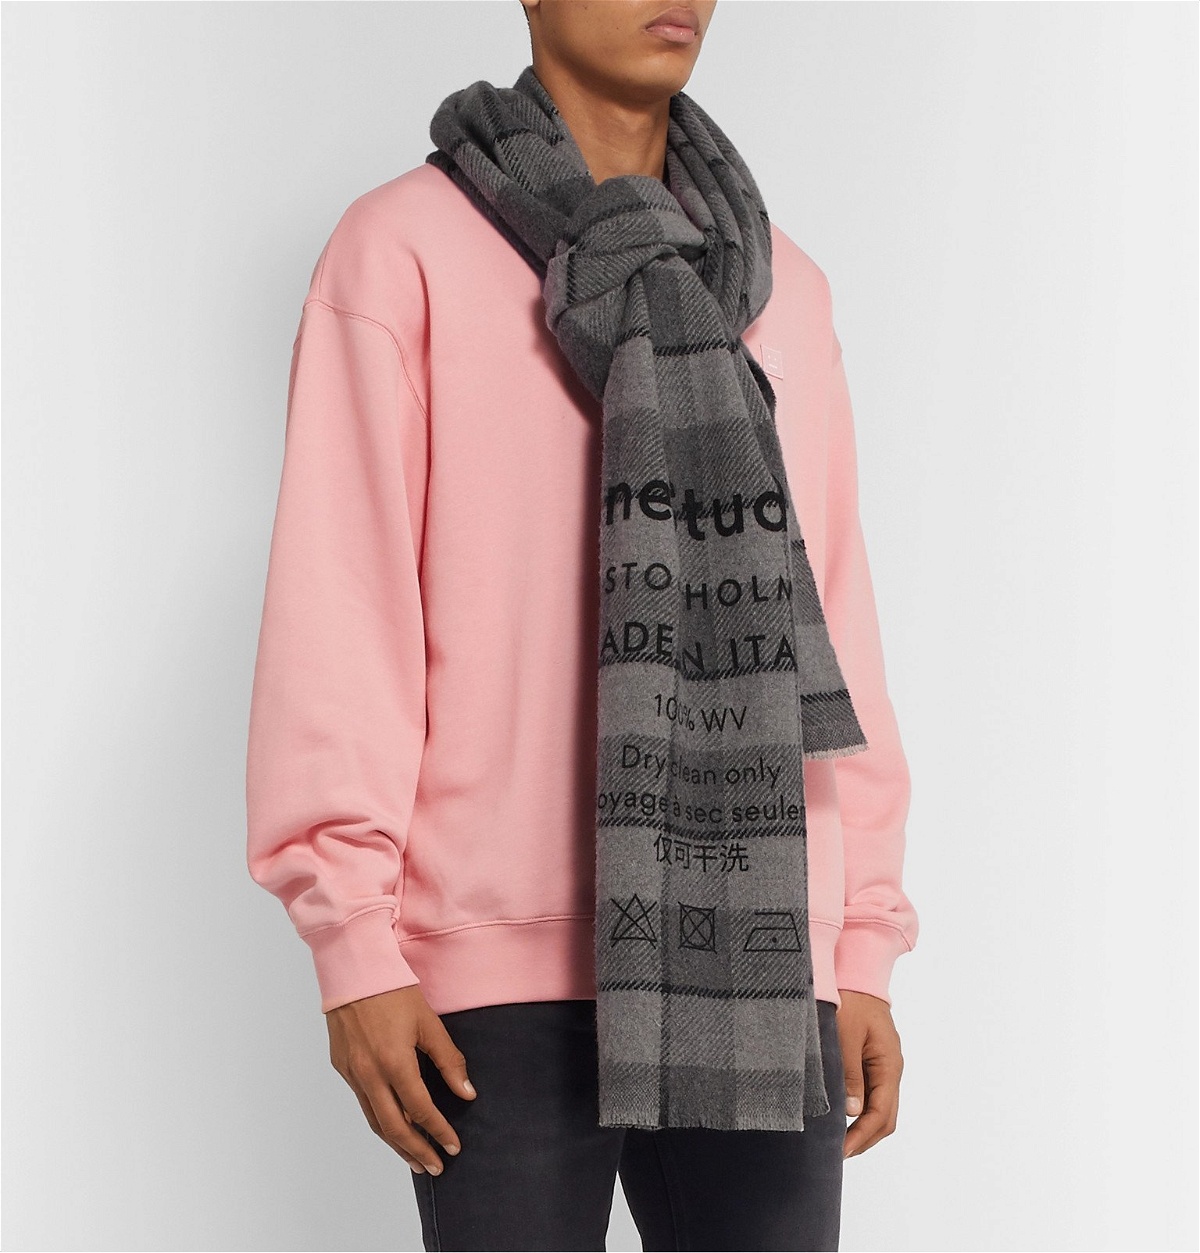 Acne Studios - Cassiar Fringed Printed Checked Wool Scarf - Gray